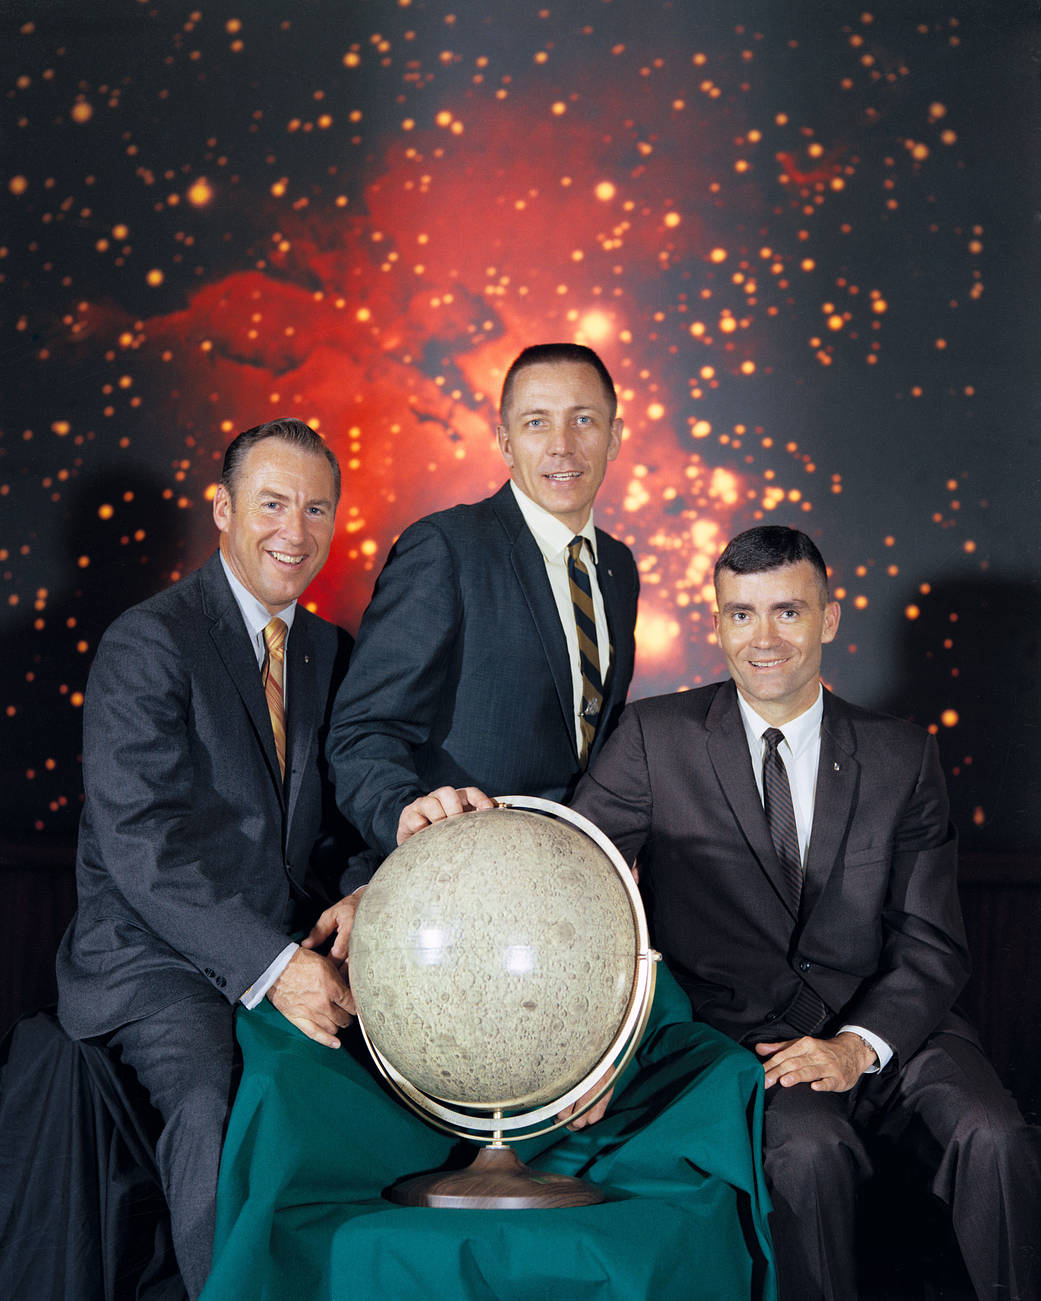 Apollo 13 crew pose for portrait wearing suits with globe of moon and galaxy backdrop